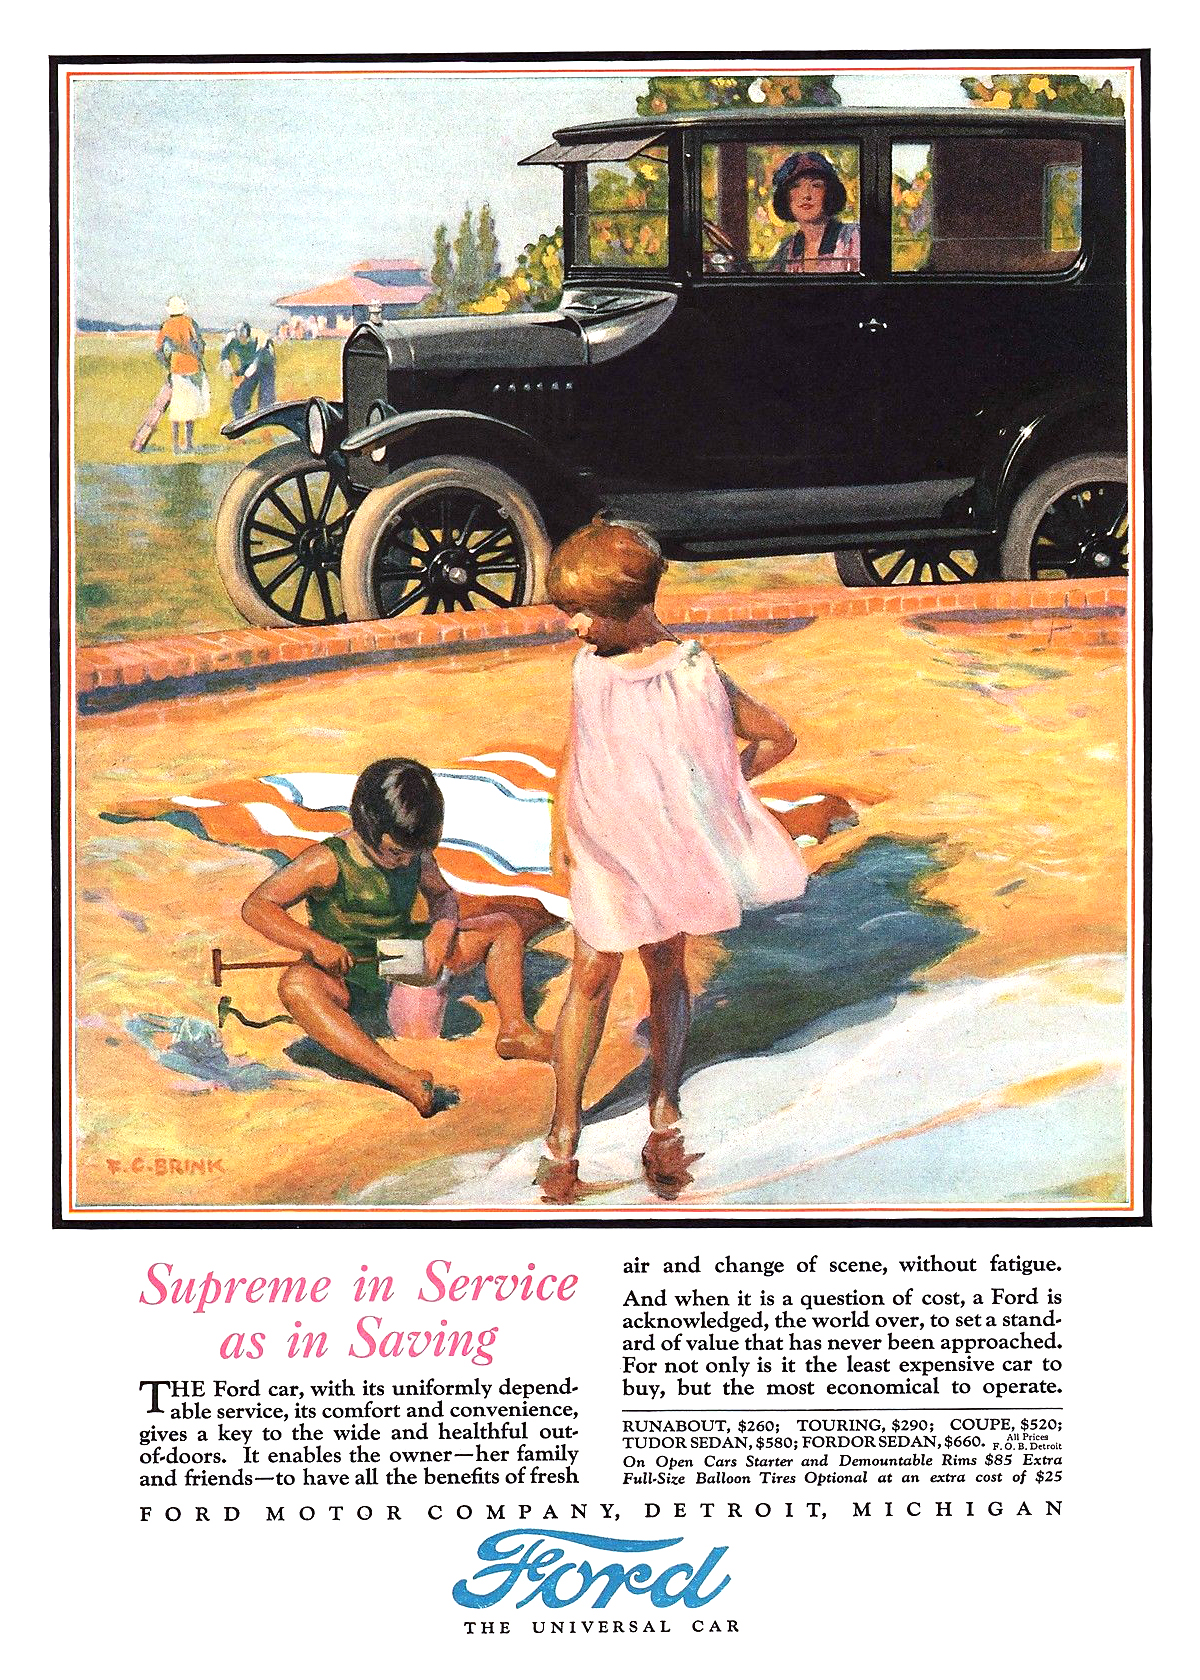 Ford Model T Ad (July, 1925) – Supreme in Service as in Saving – Illustrated by Floyd C. Brink